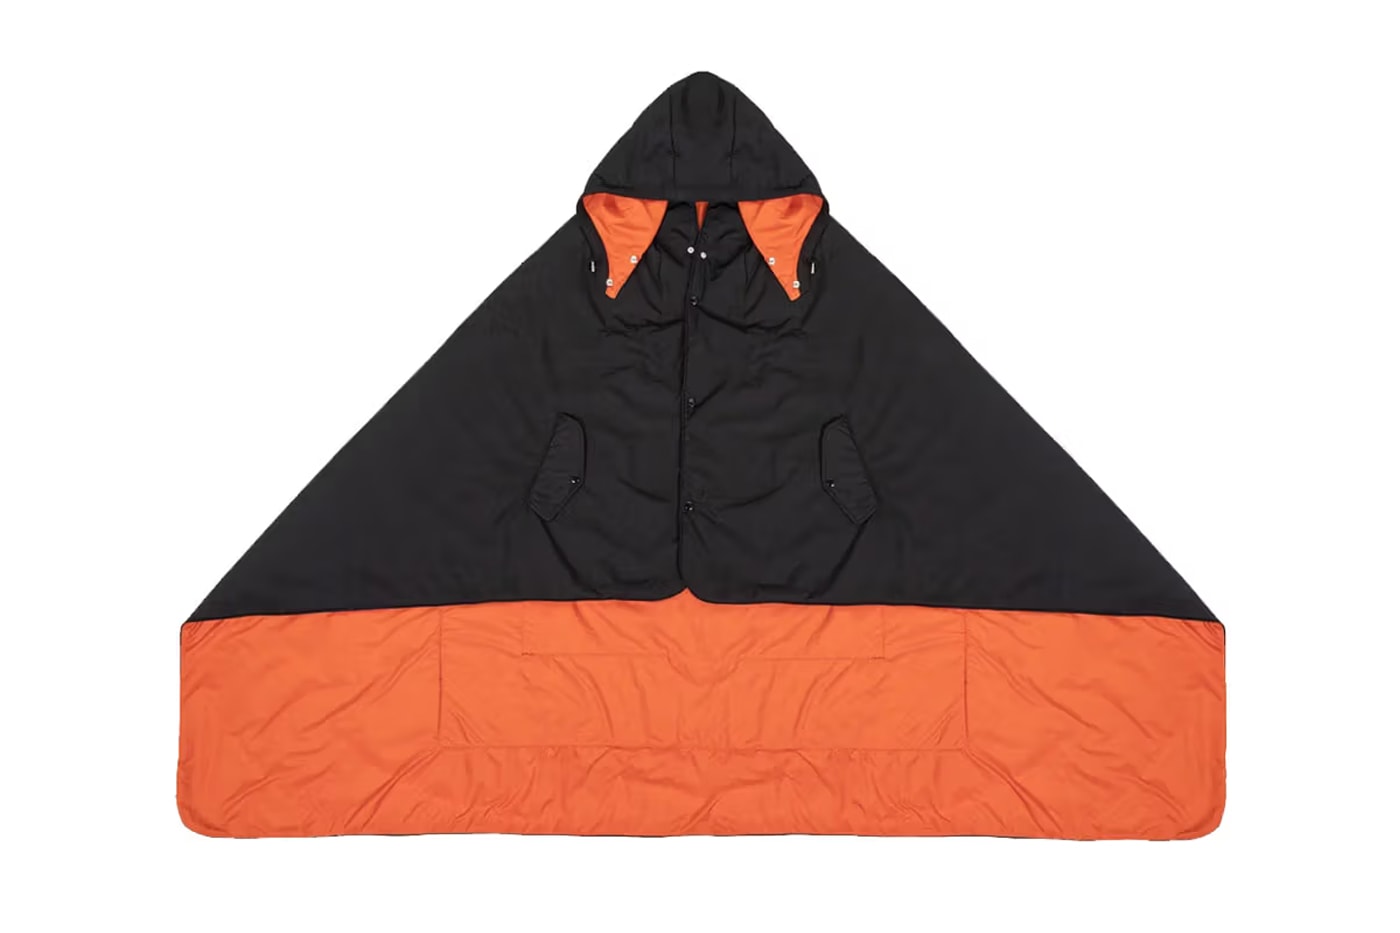 Raf Simons' Re-Issued Rave Blanket Cape Lauds His Industry-Shifting ...